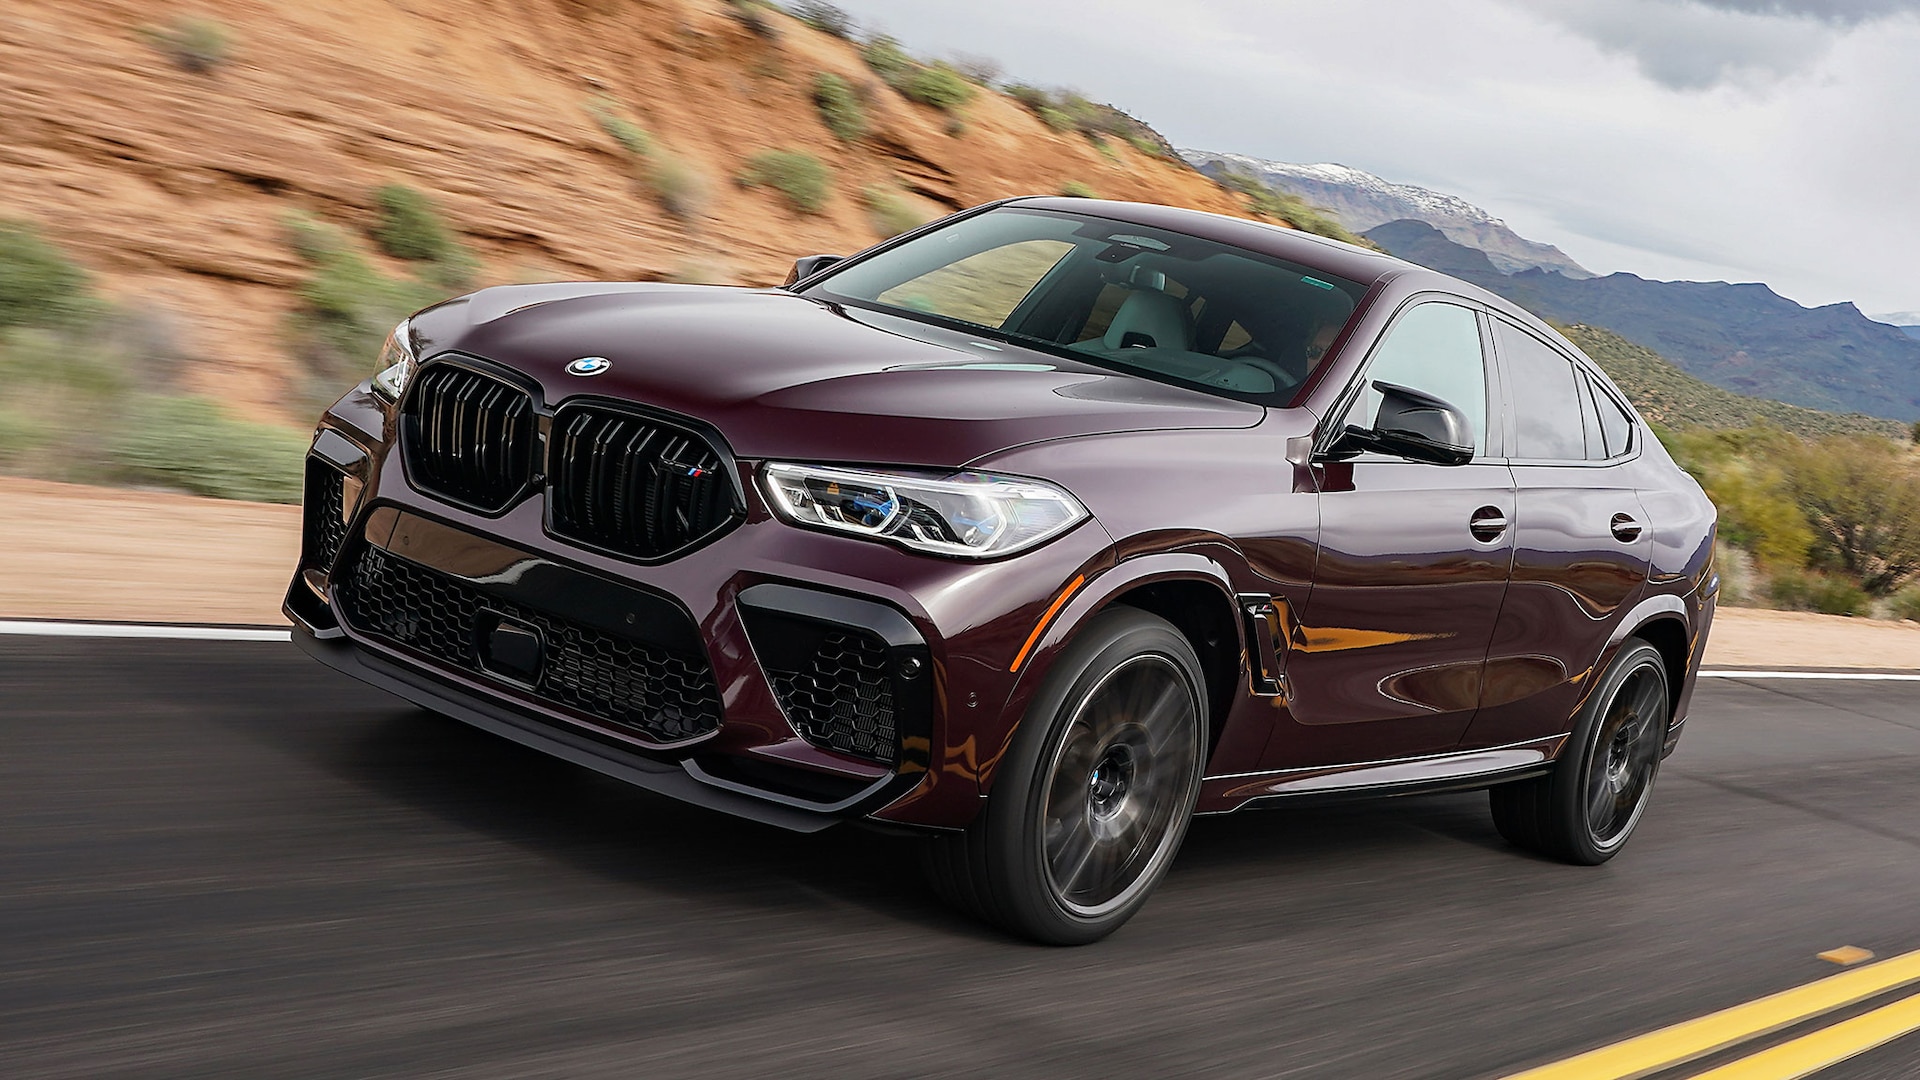 2020 BMW X6 M First Drive Review: Who's Laughing Now?